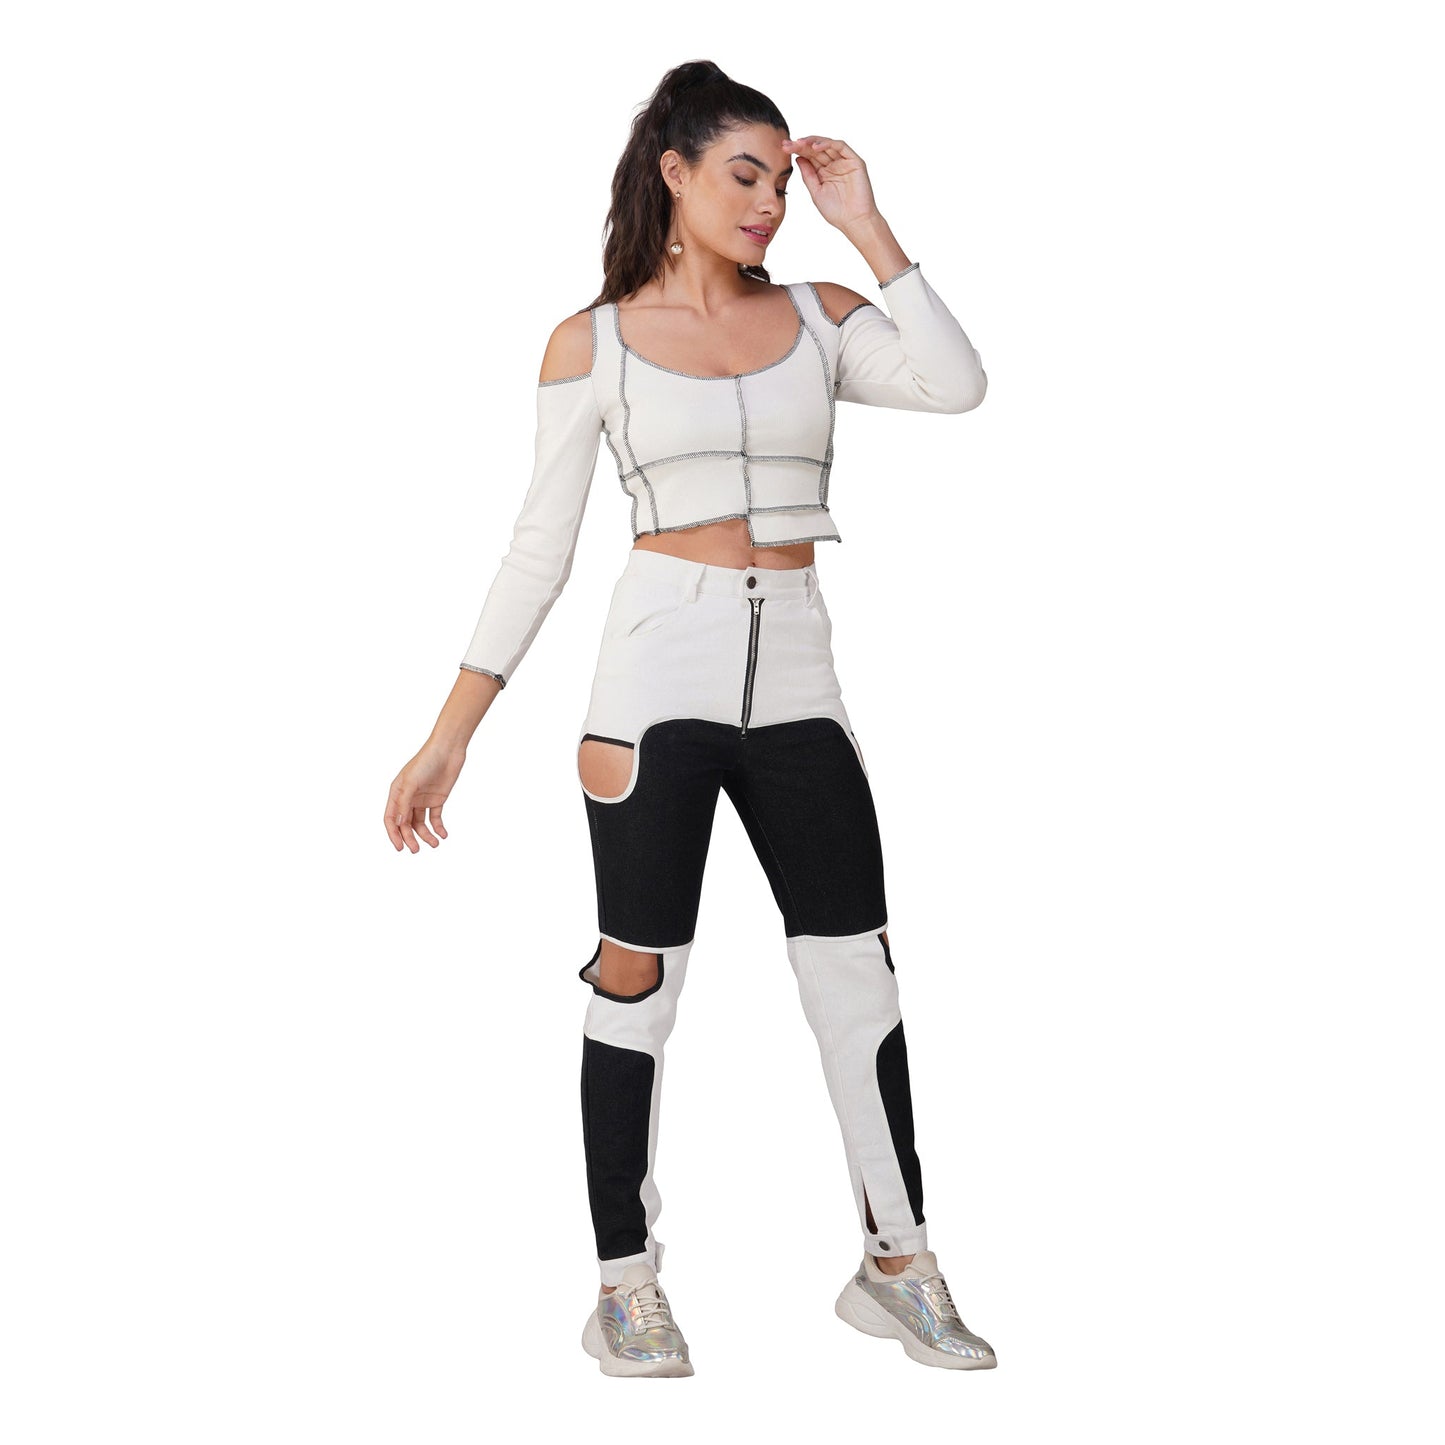 SLAY. Women's Contrast Stitch White Cold Shoulder Rib Full Sleeves Top & Jeans Co-ord Set